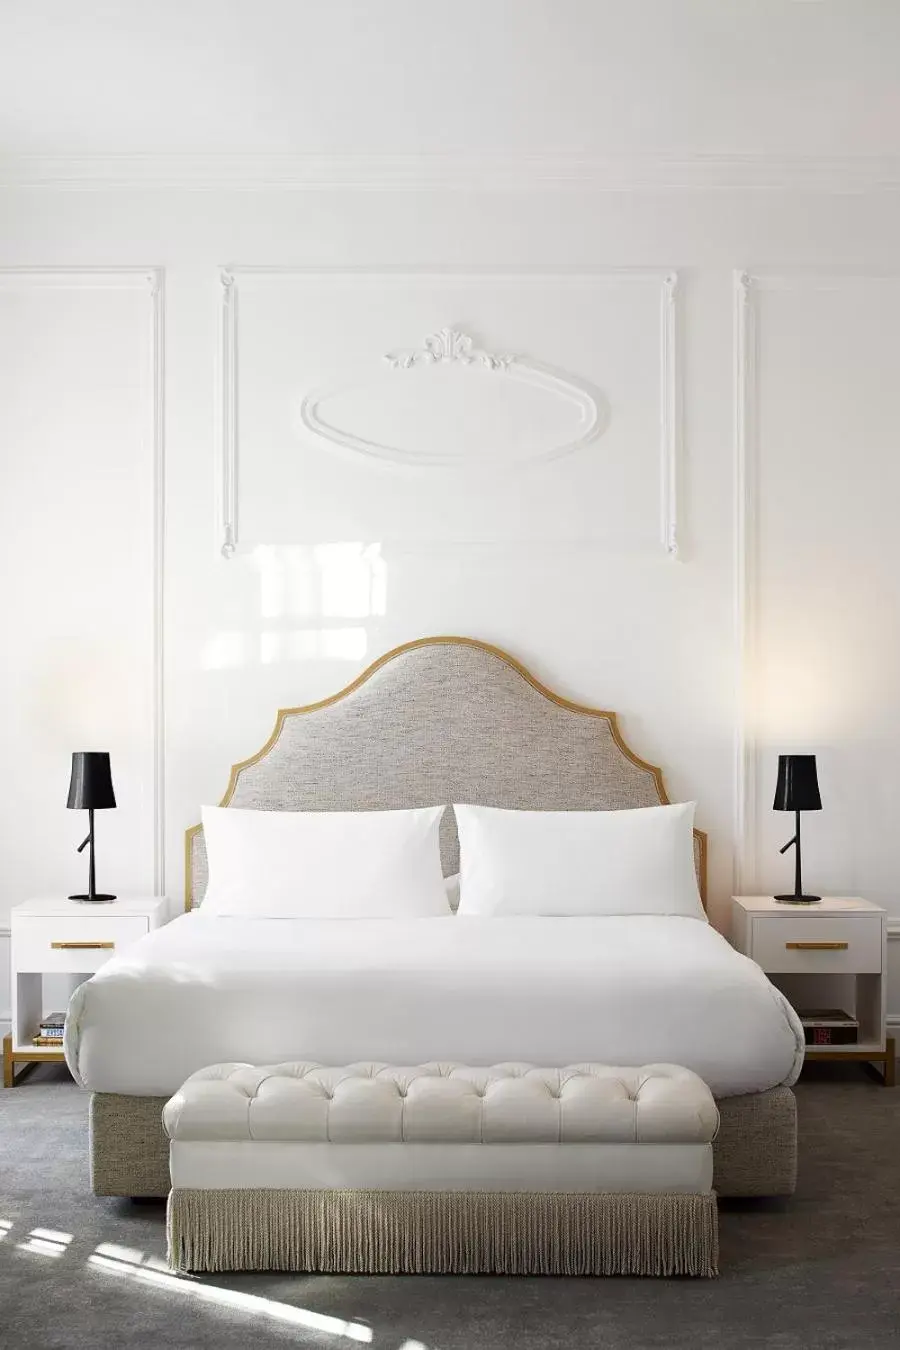 Bed in The Alphen Boutique Hotel & Spa